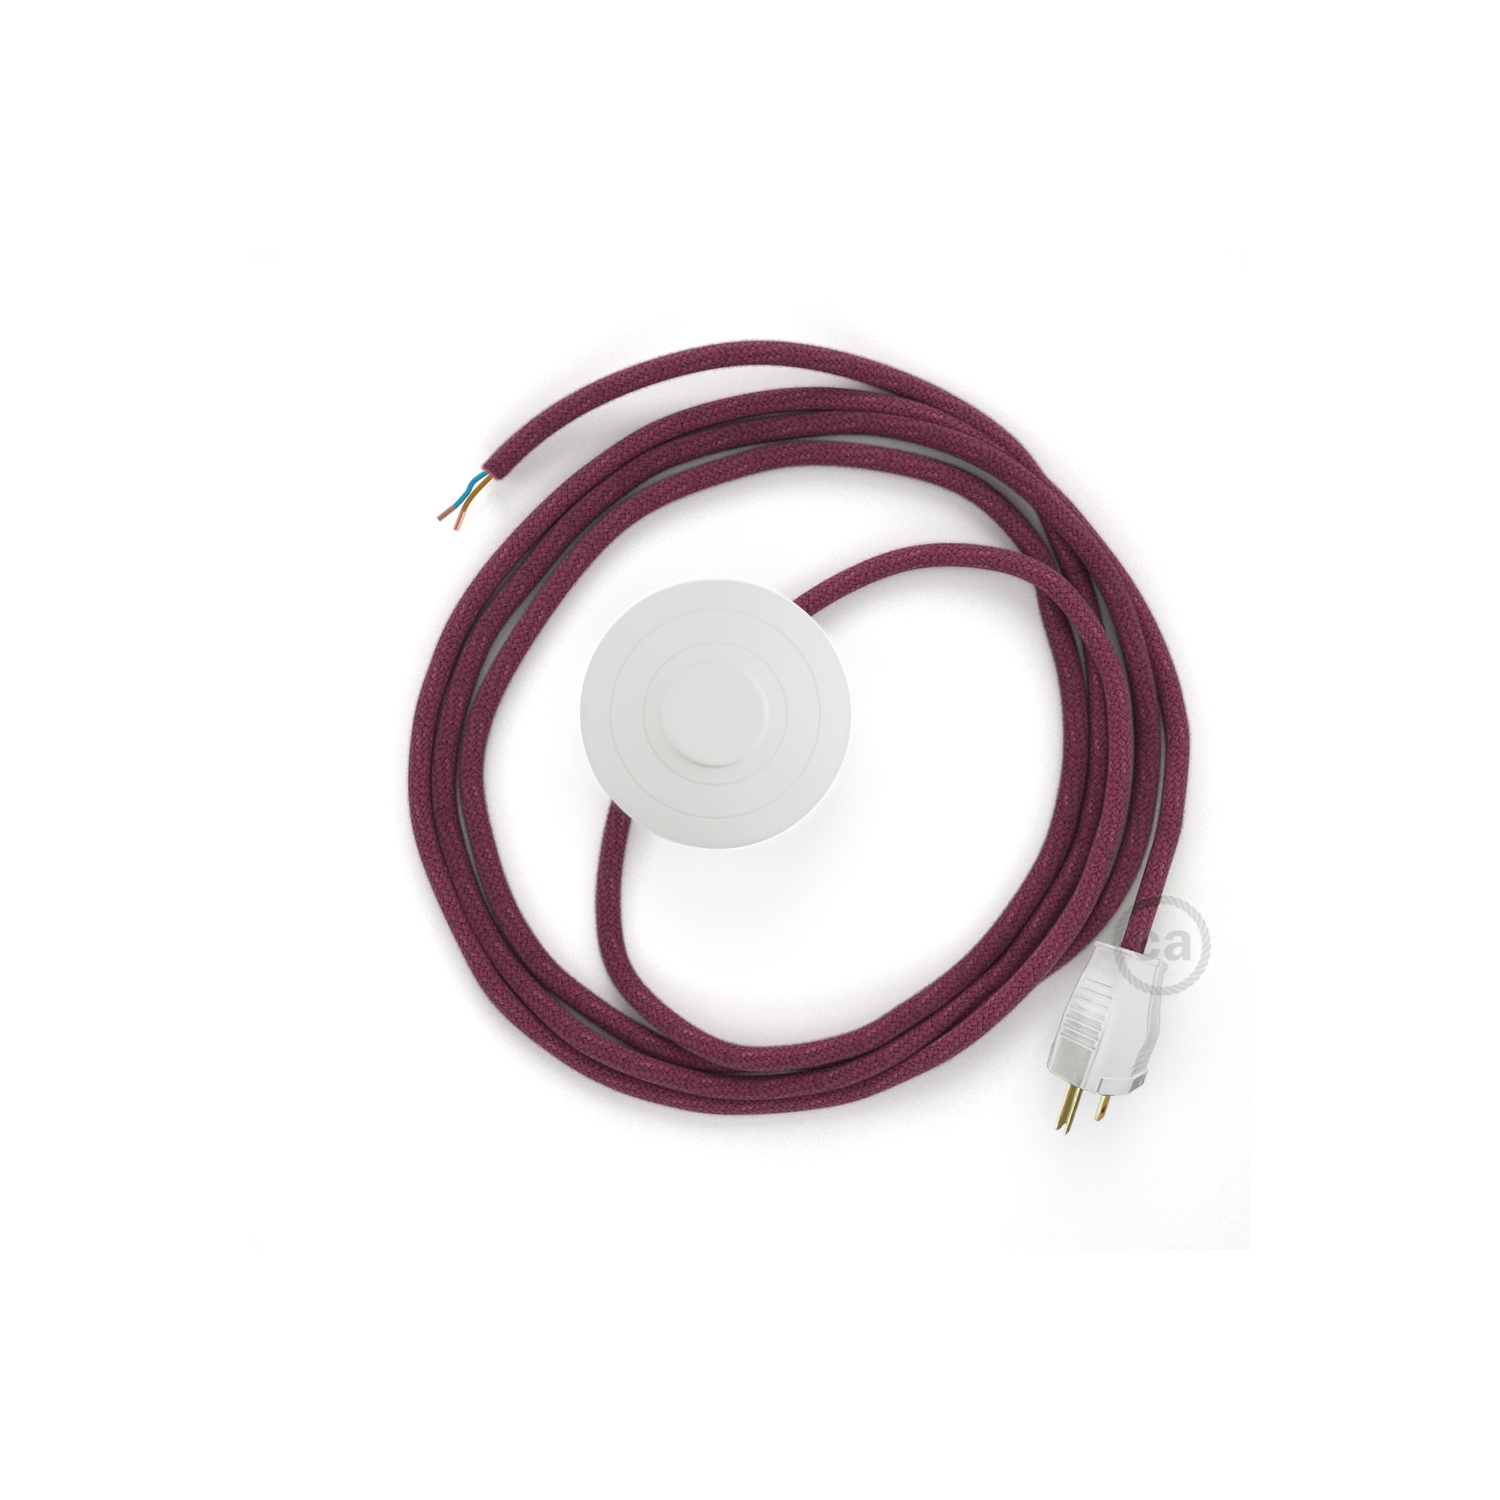 Power Cord with foot switch, RC32 Raspberry Cotton - Choose color of switch/plug